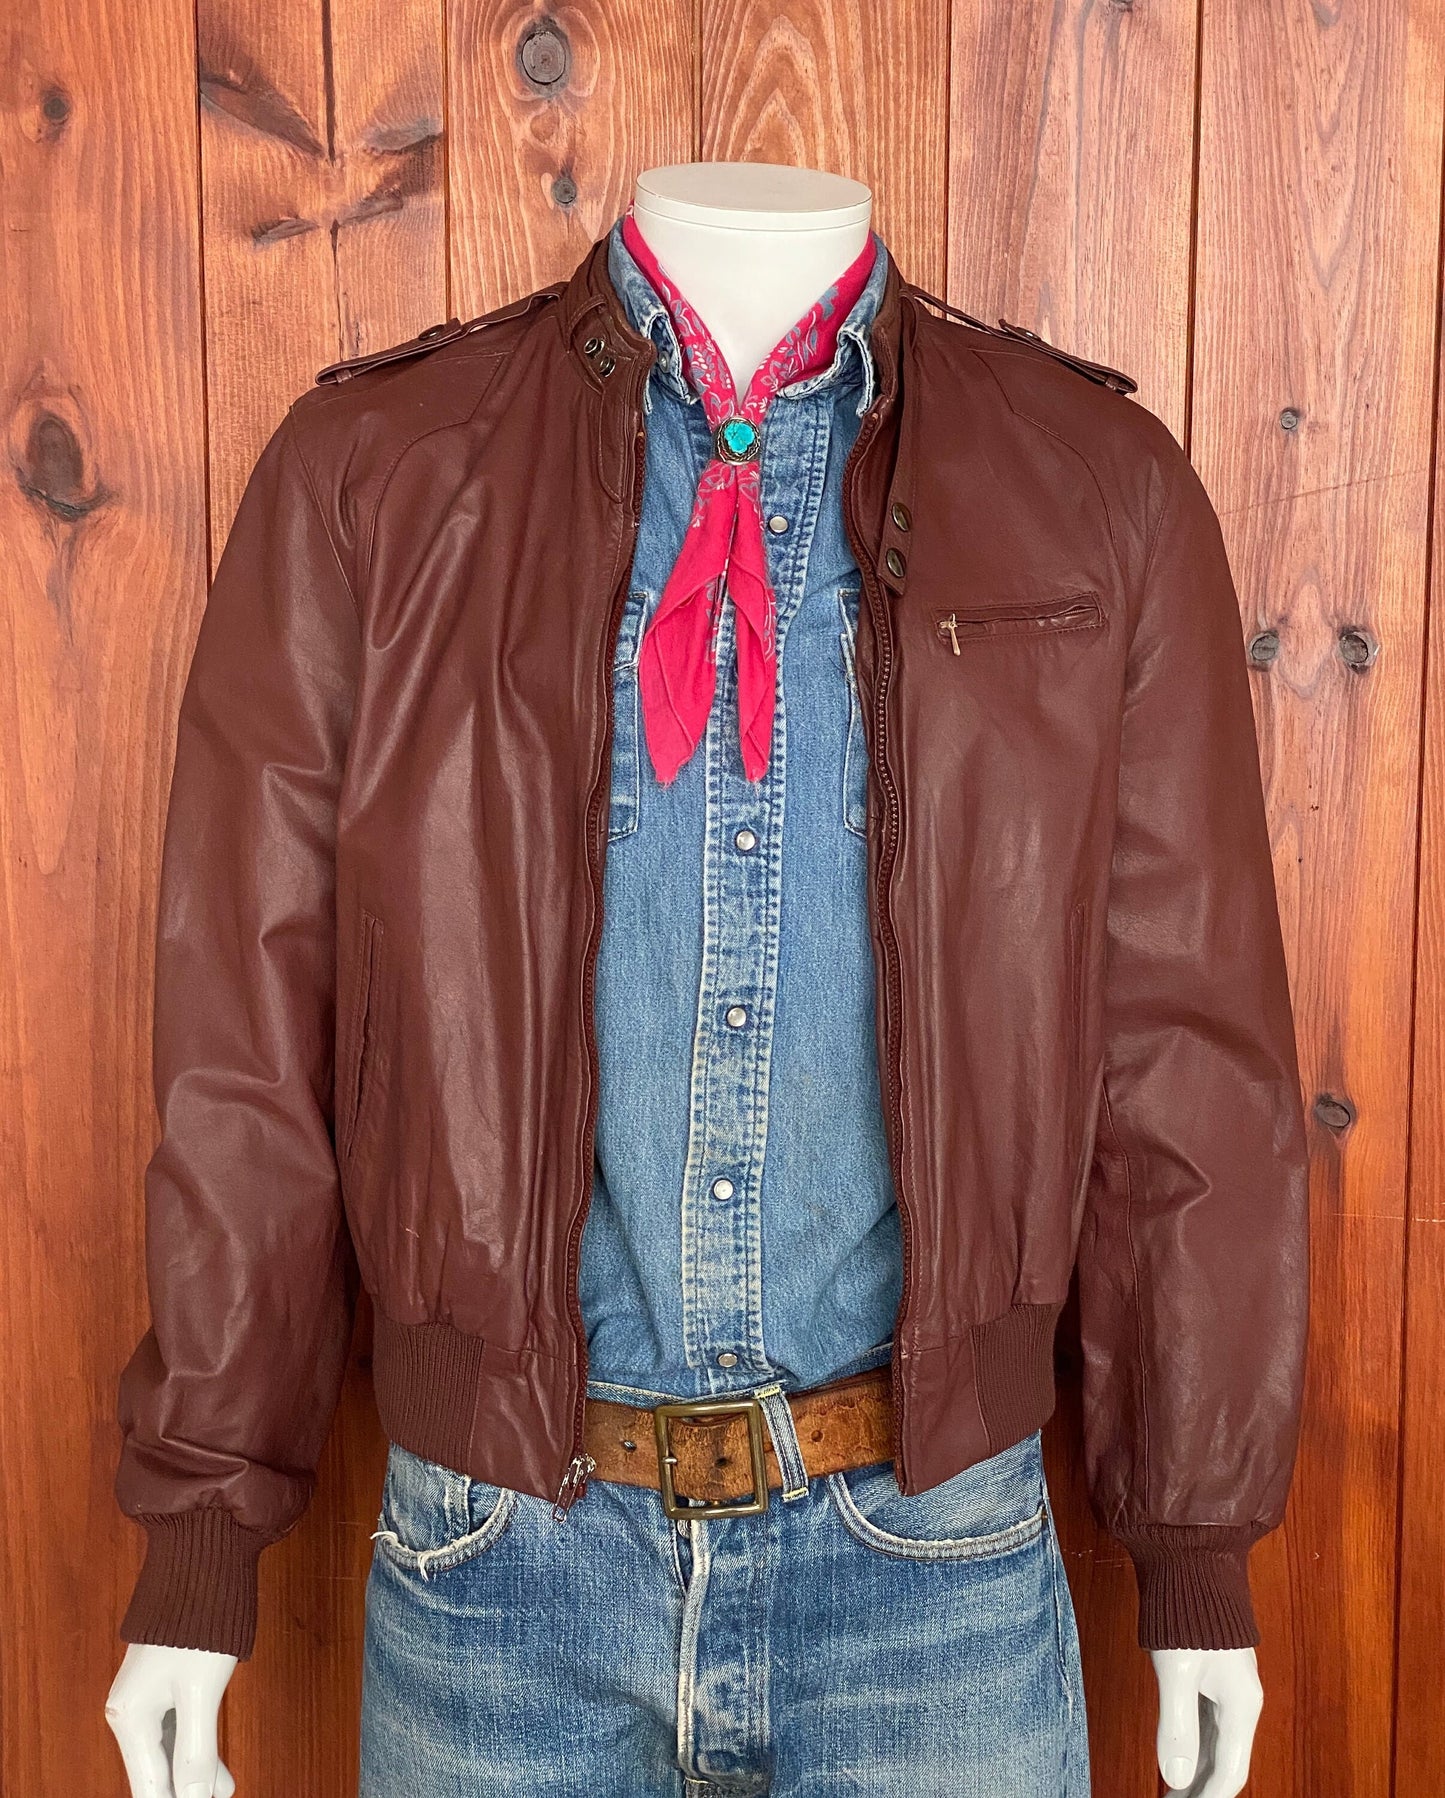 80s Vintage Leather Jacket Members Only Style - Size 42 Long (Fits 50 EU), Made in USA”